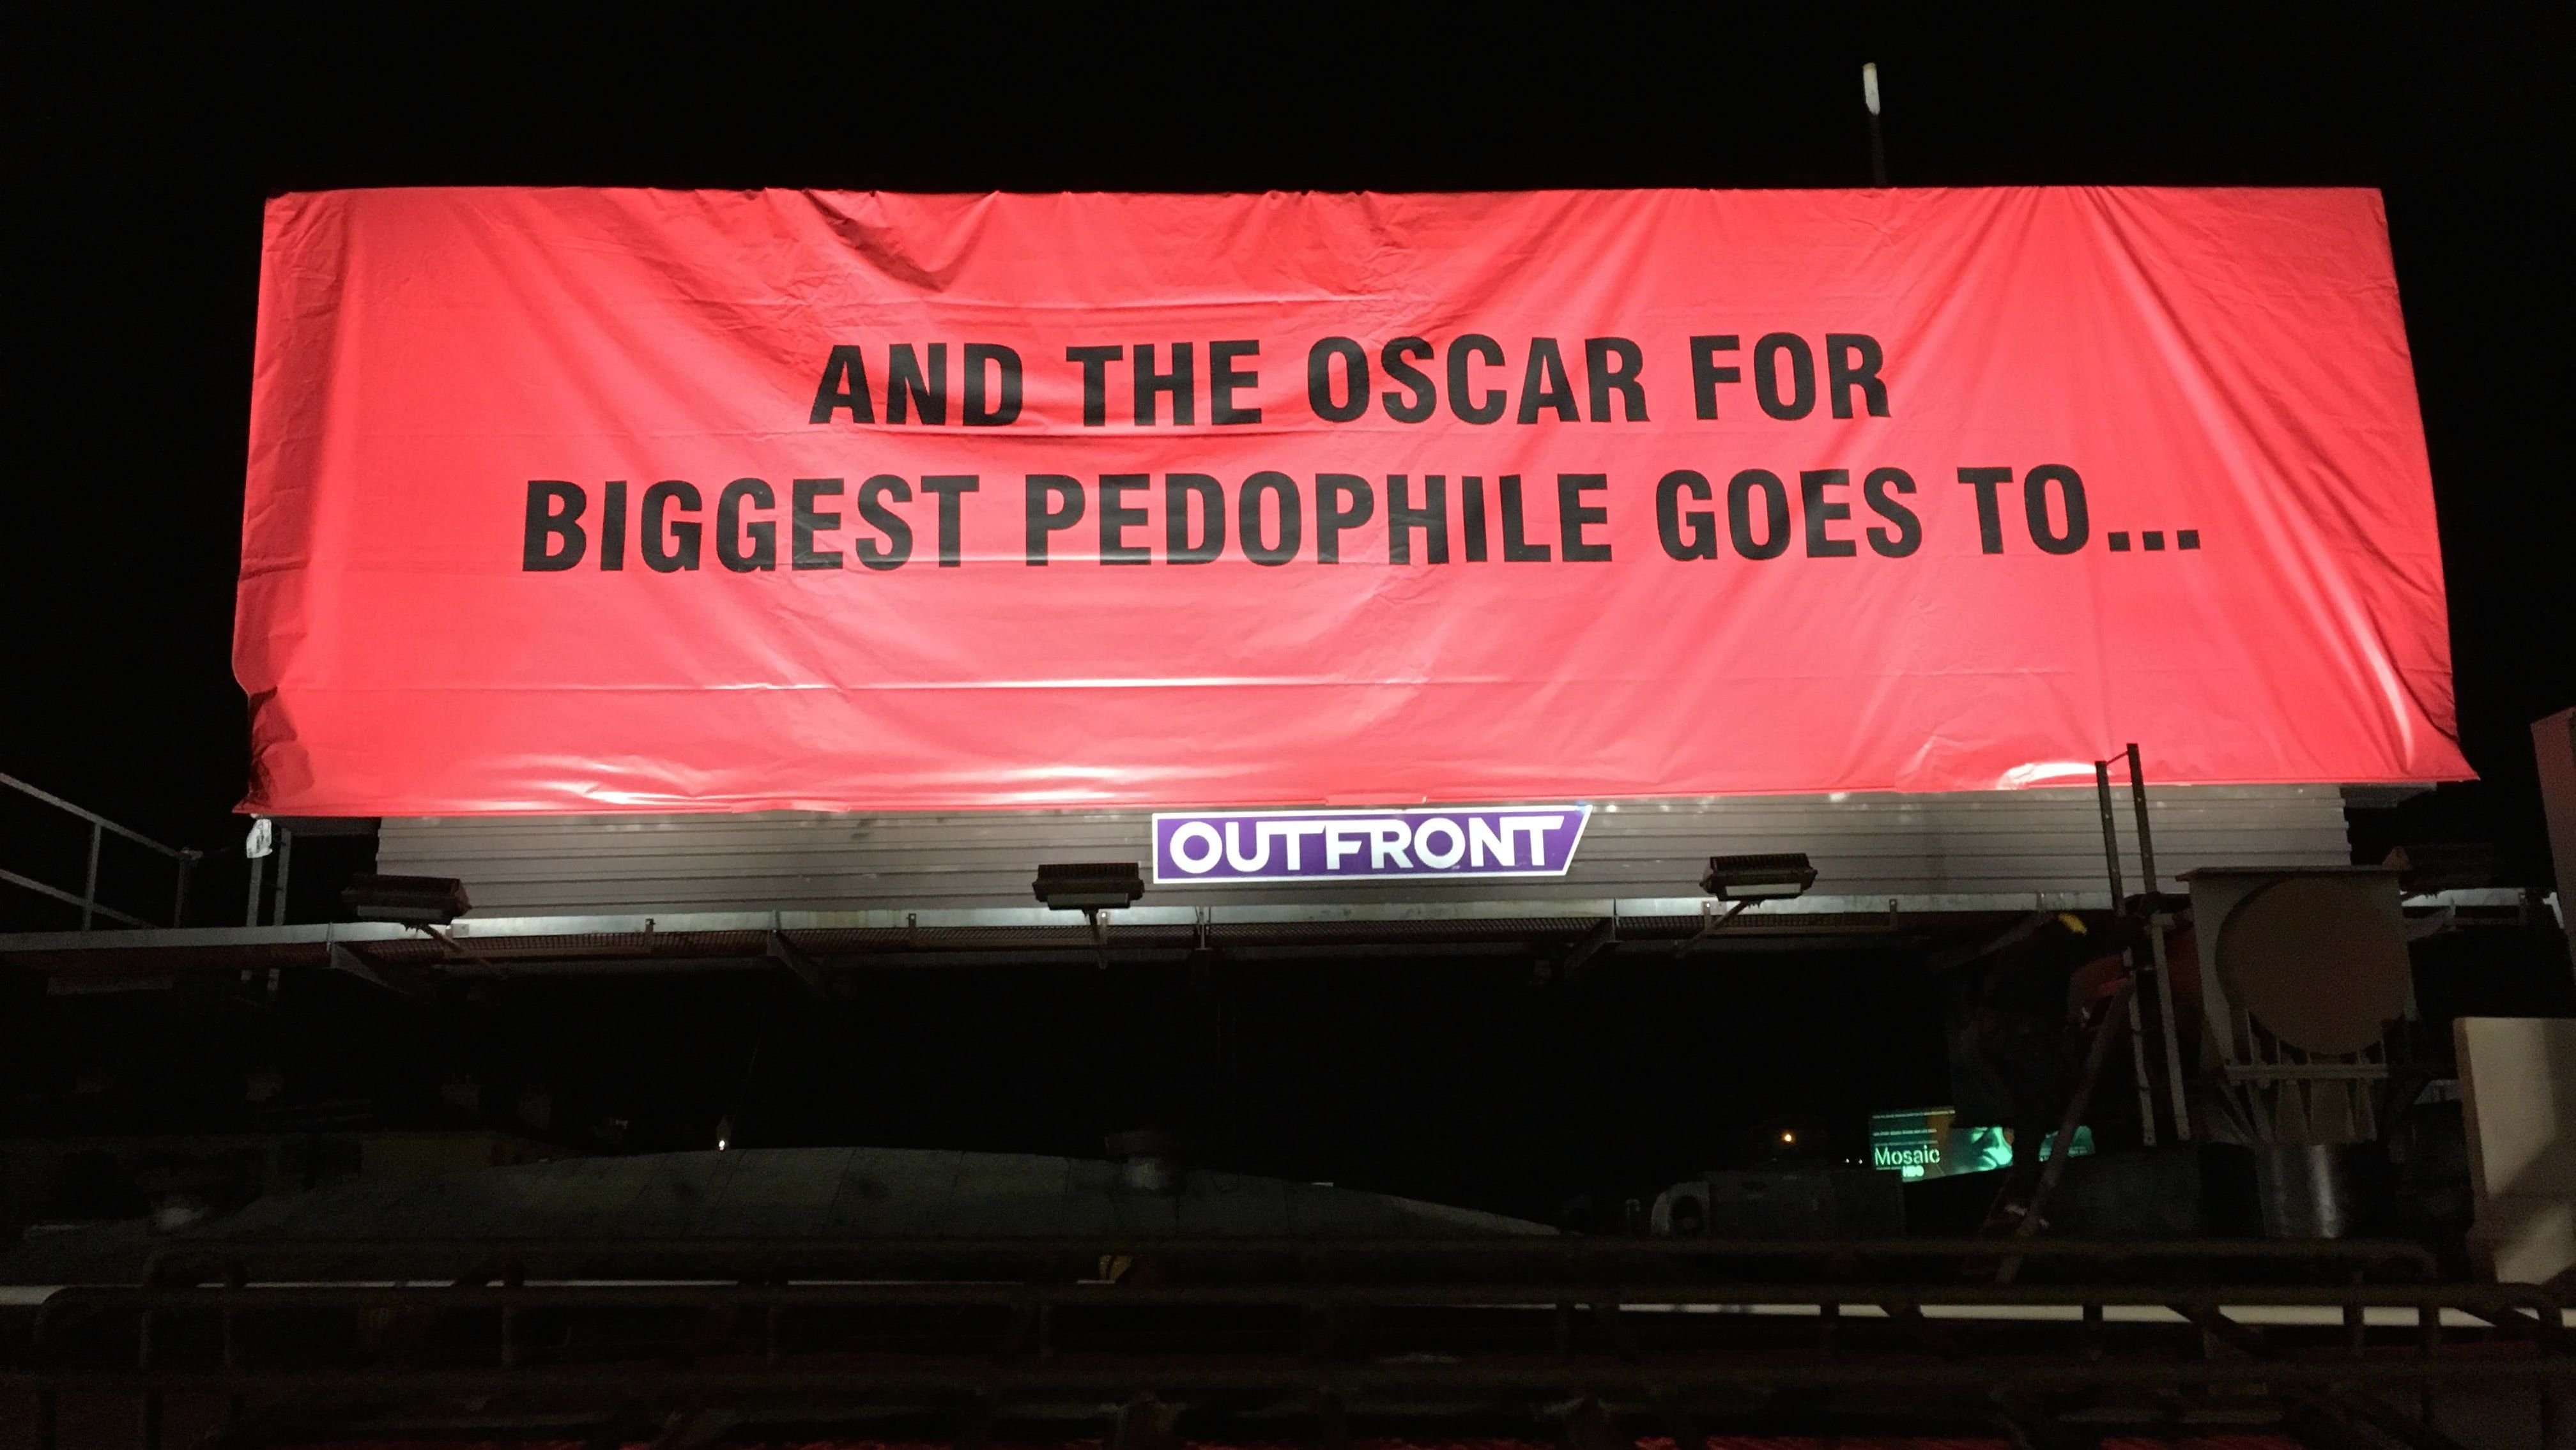 image for Street Artist Erects Three Billboards Over Hollywood: "Oscar for Biggest Pedophile Goes to ..."